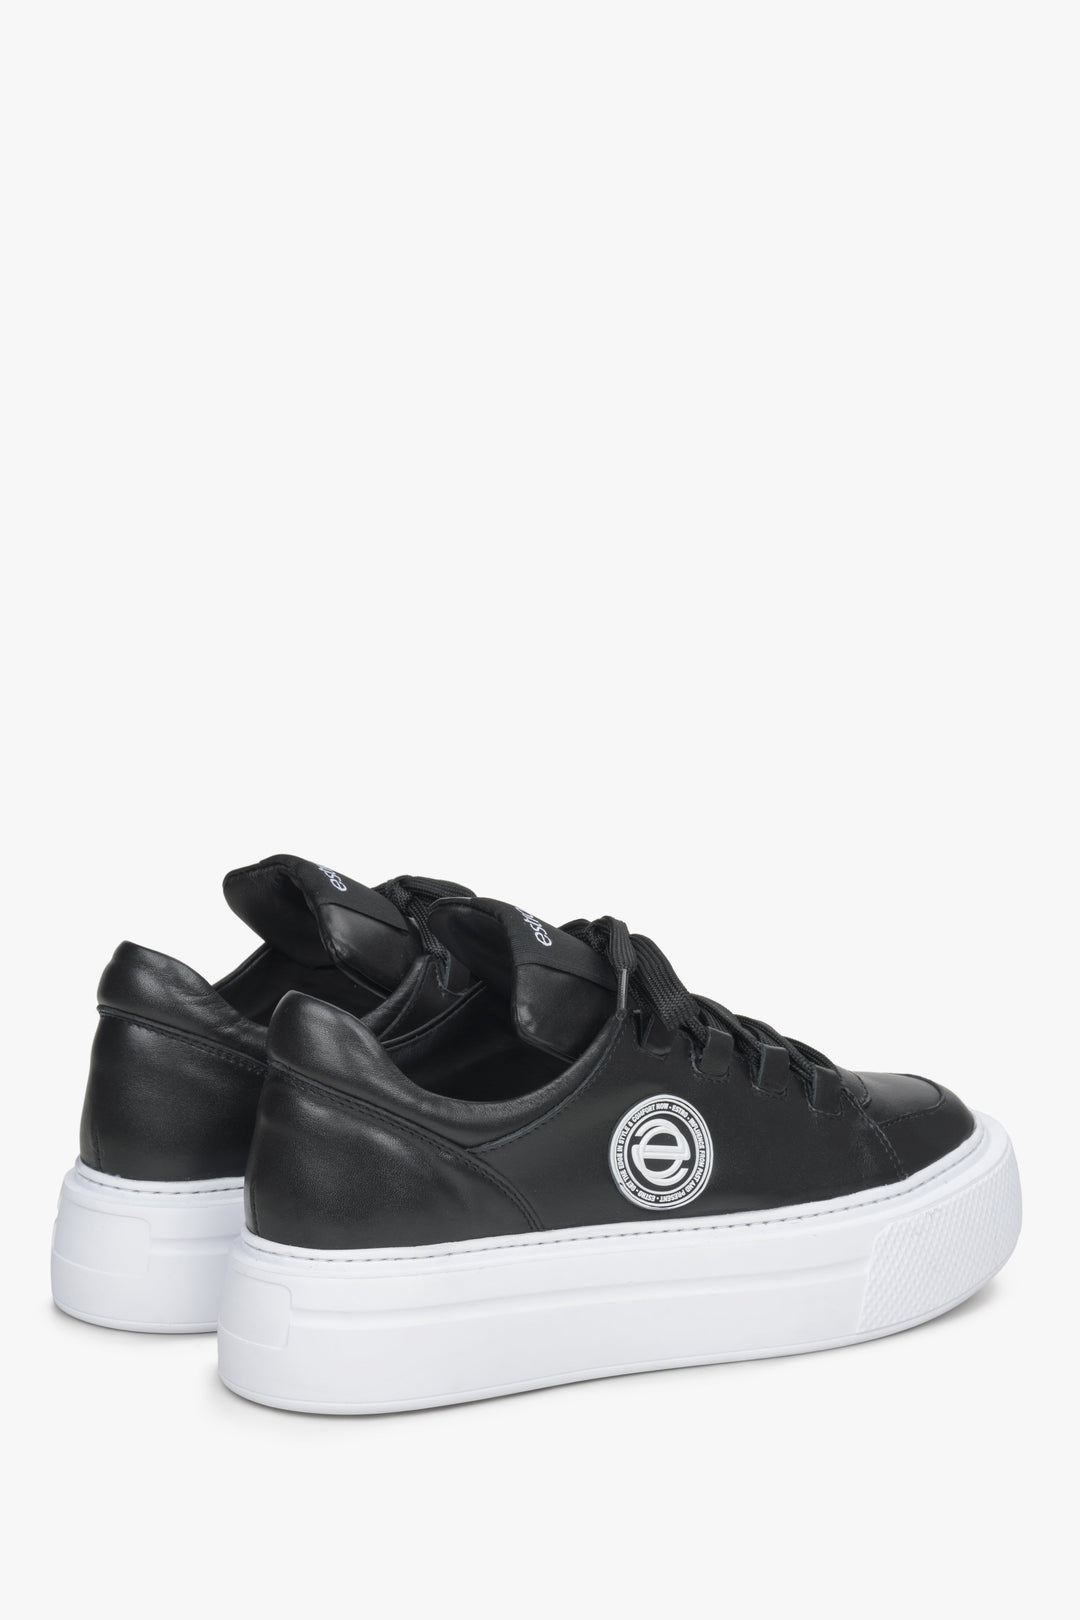 Estro black leather sneakers on a thick sole - close-up on the back.